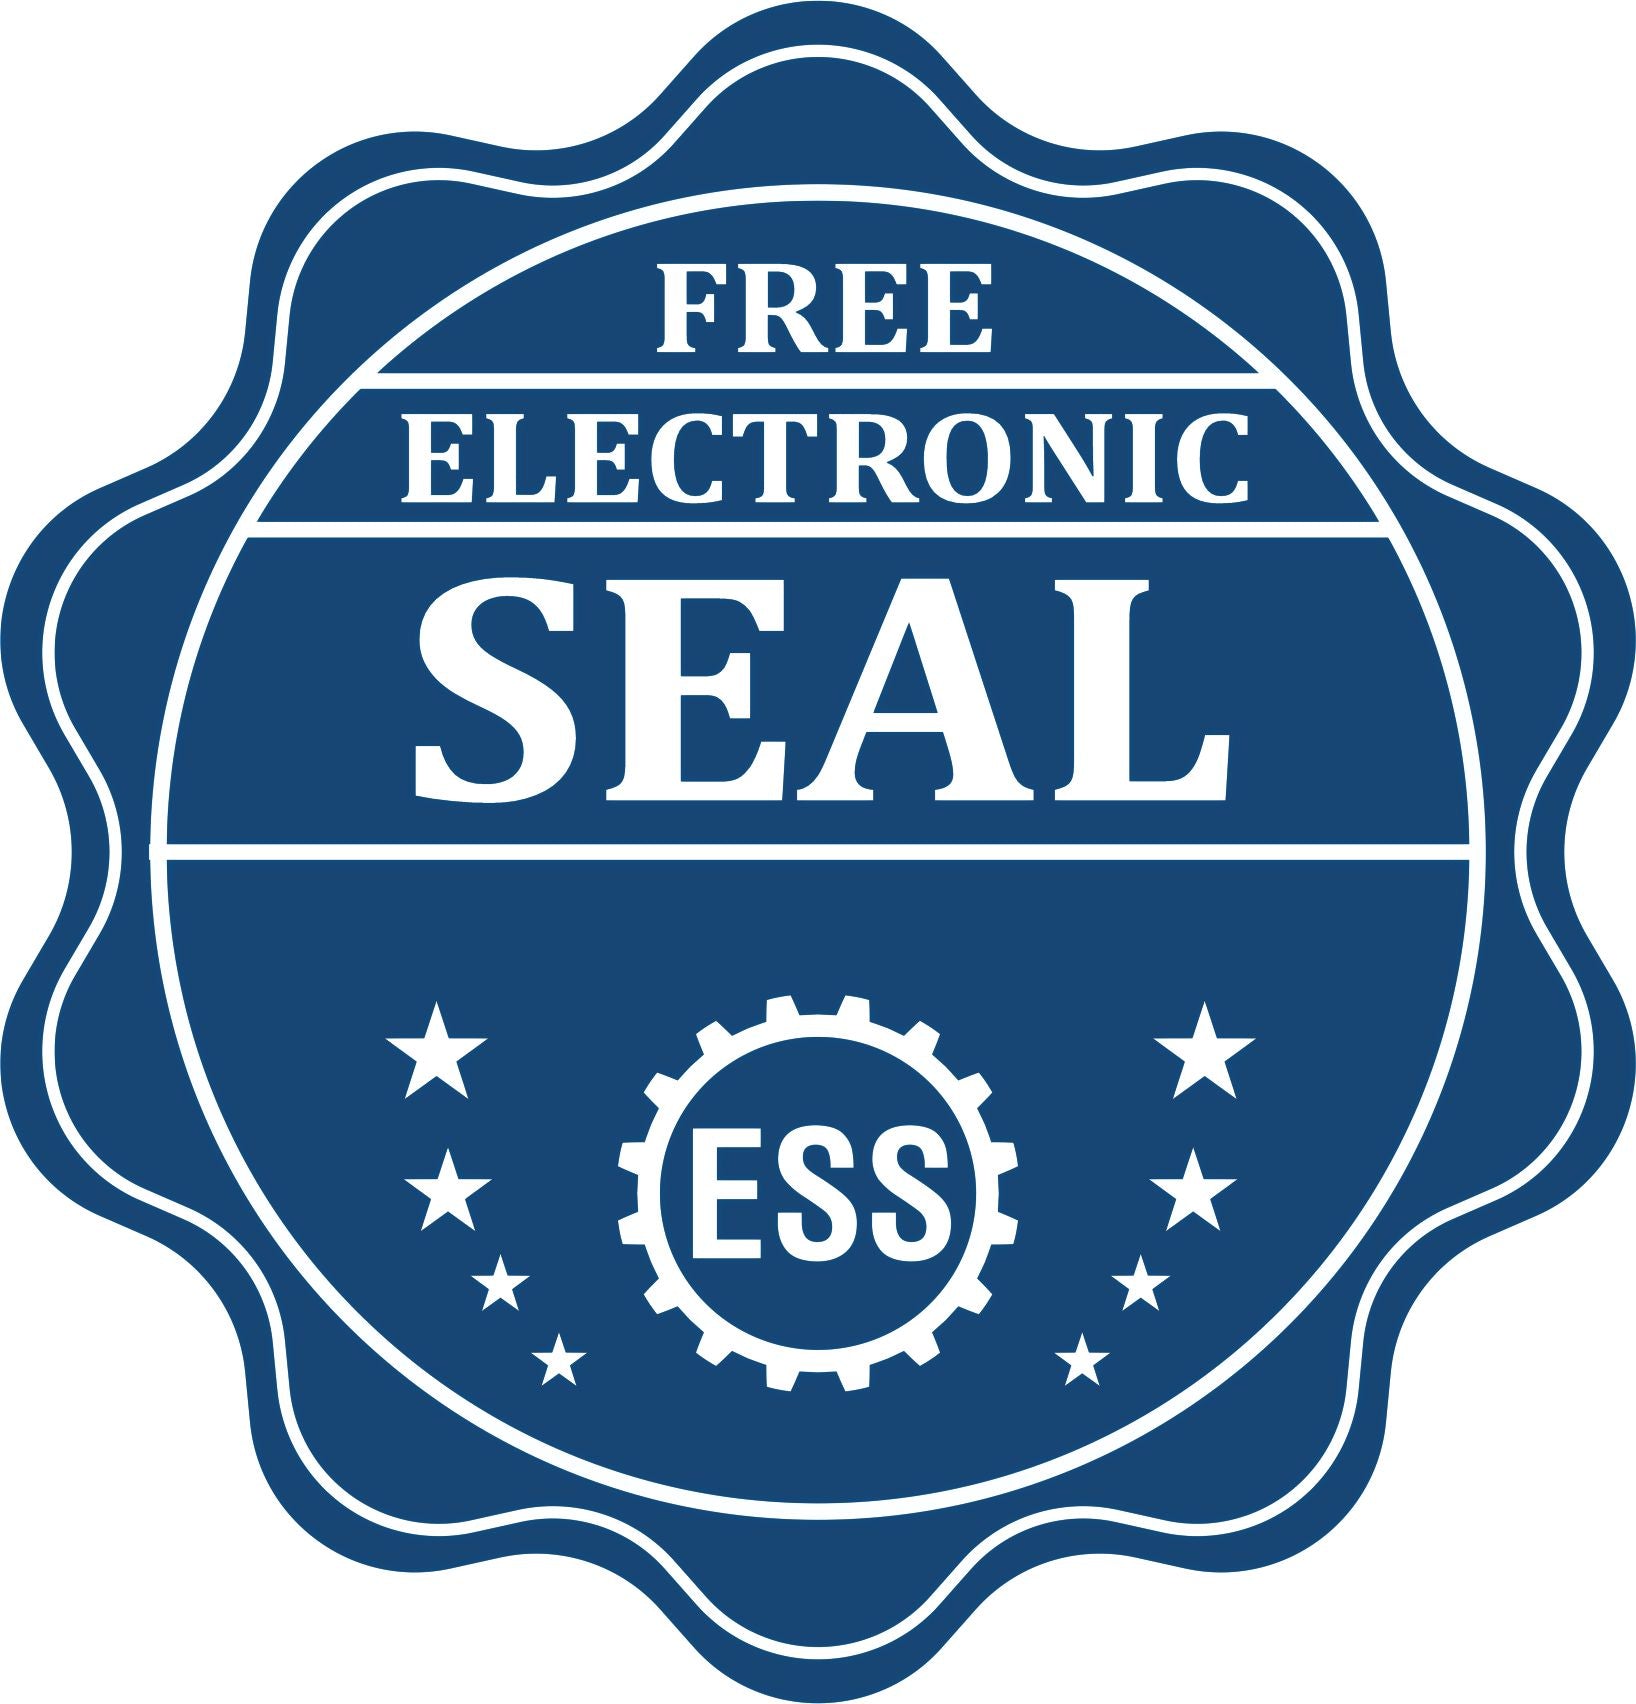 A badge showing a free electronic seal for the Maryland Professional Engineer Seal Stamp with stars and the ESS gear on the emblem.